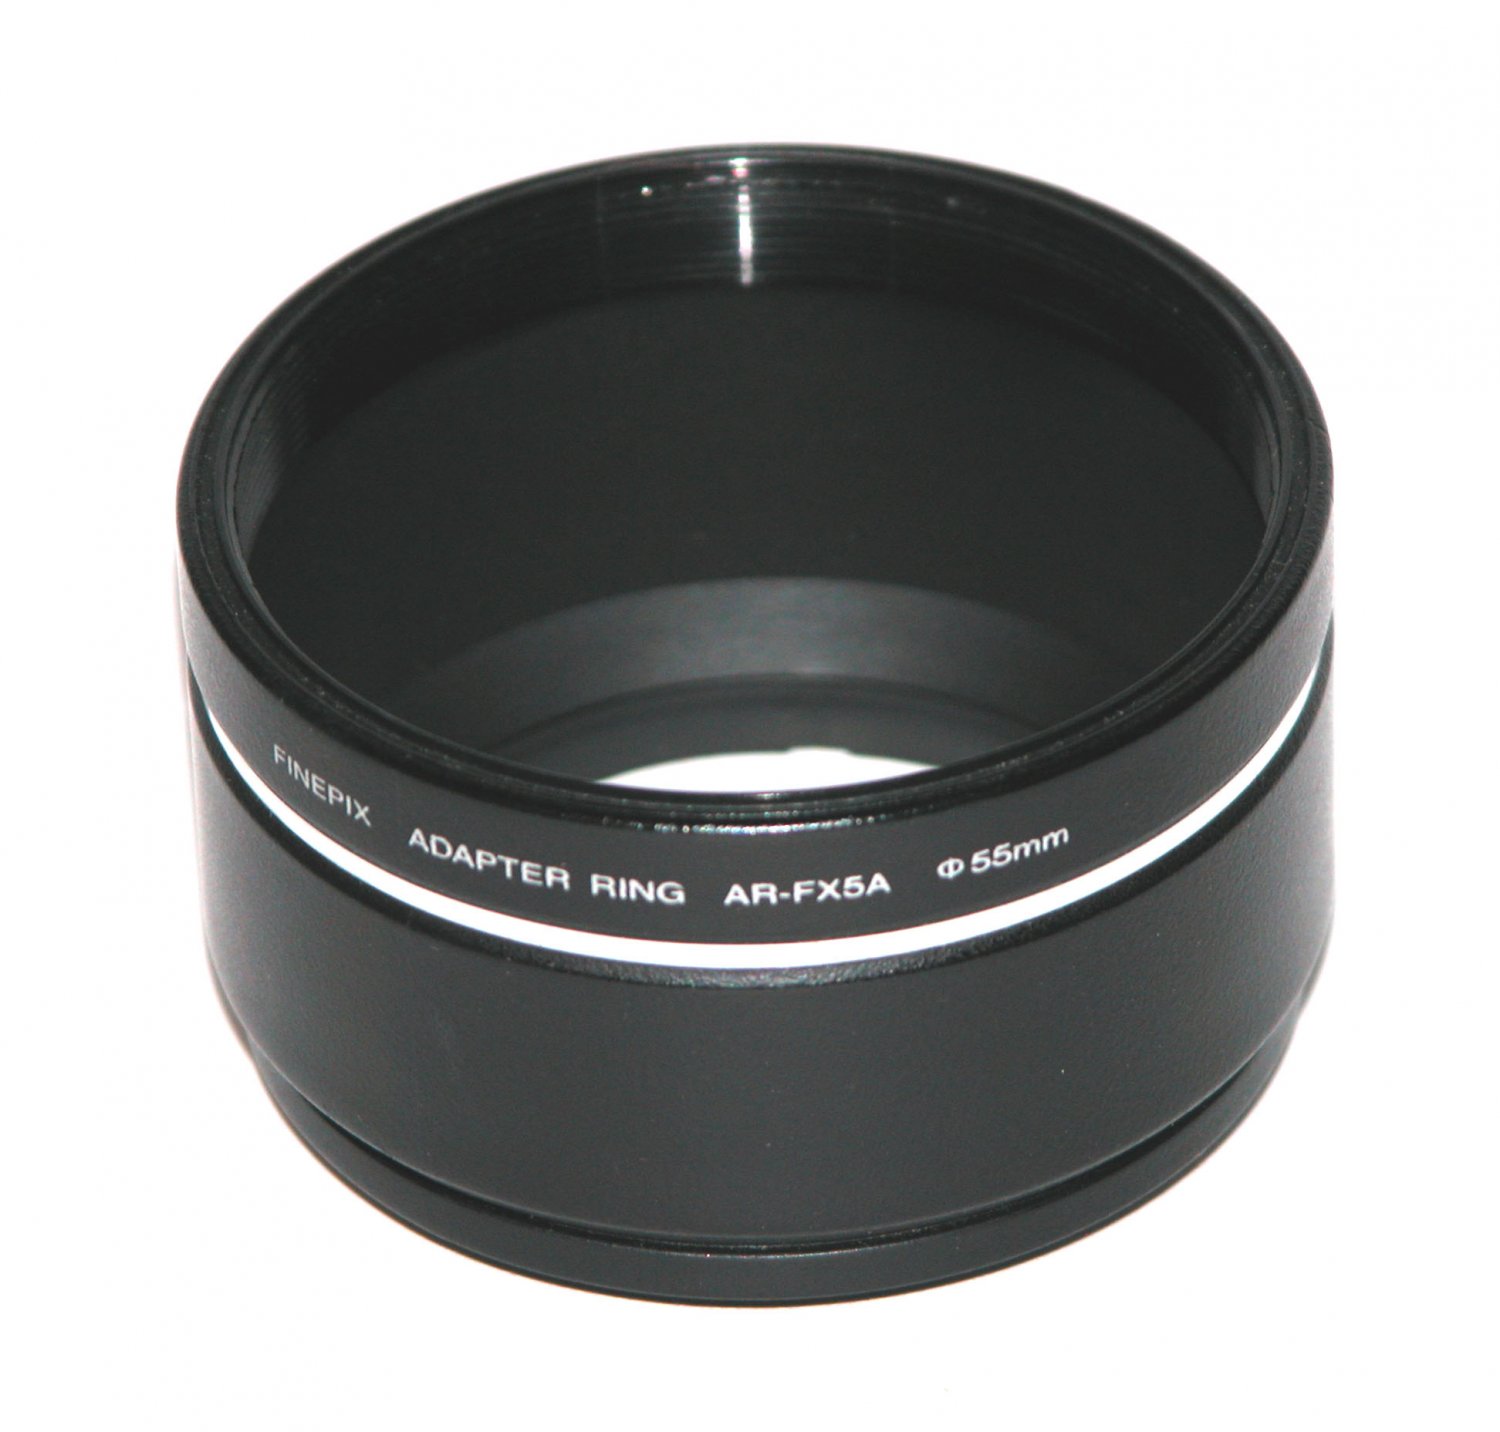 Lens Adapter Ring For Fujifilm Finepix S5000 S5100 (AR-FX5A)